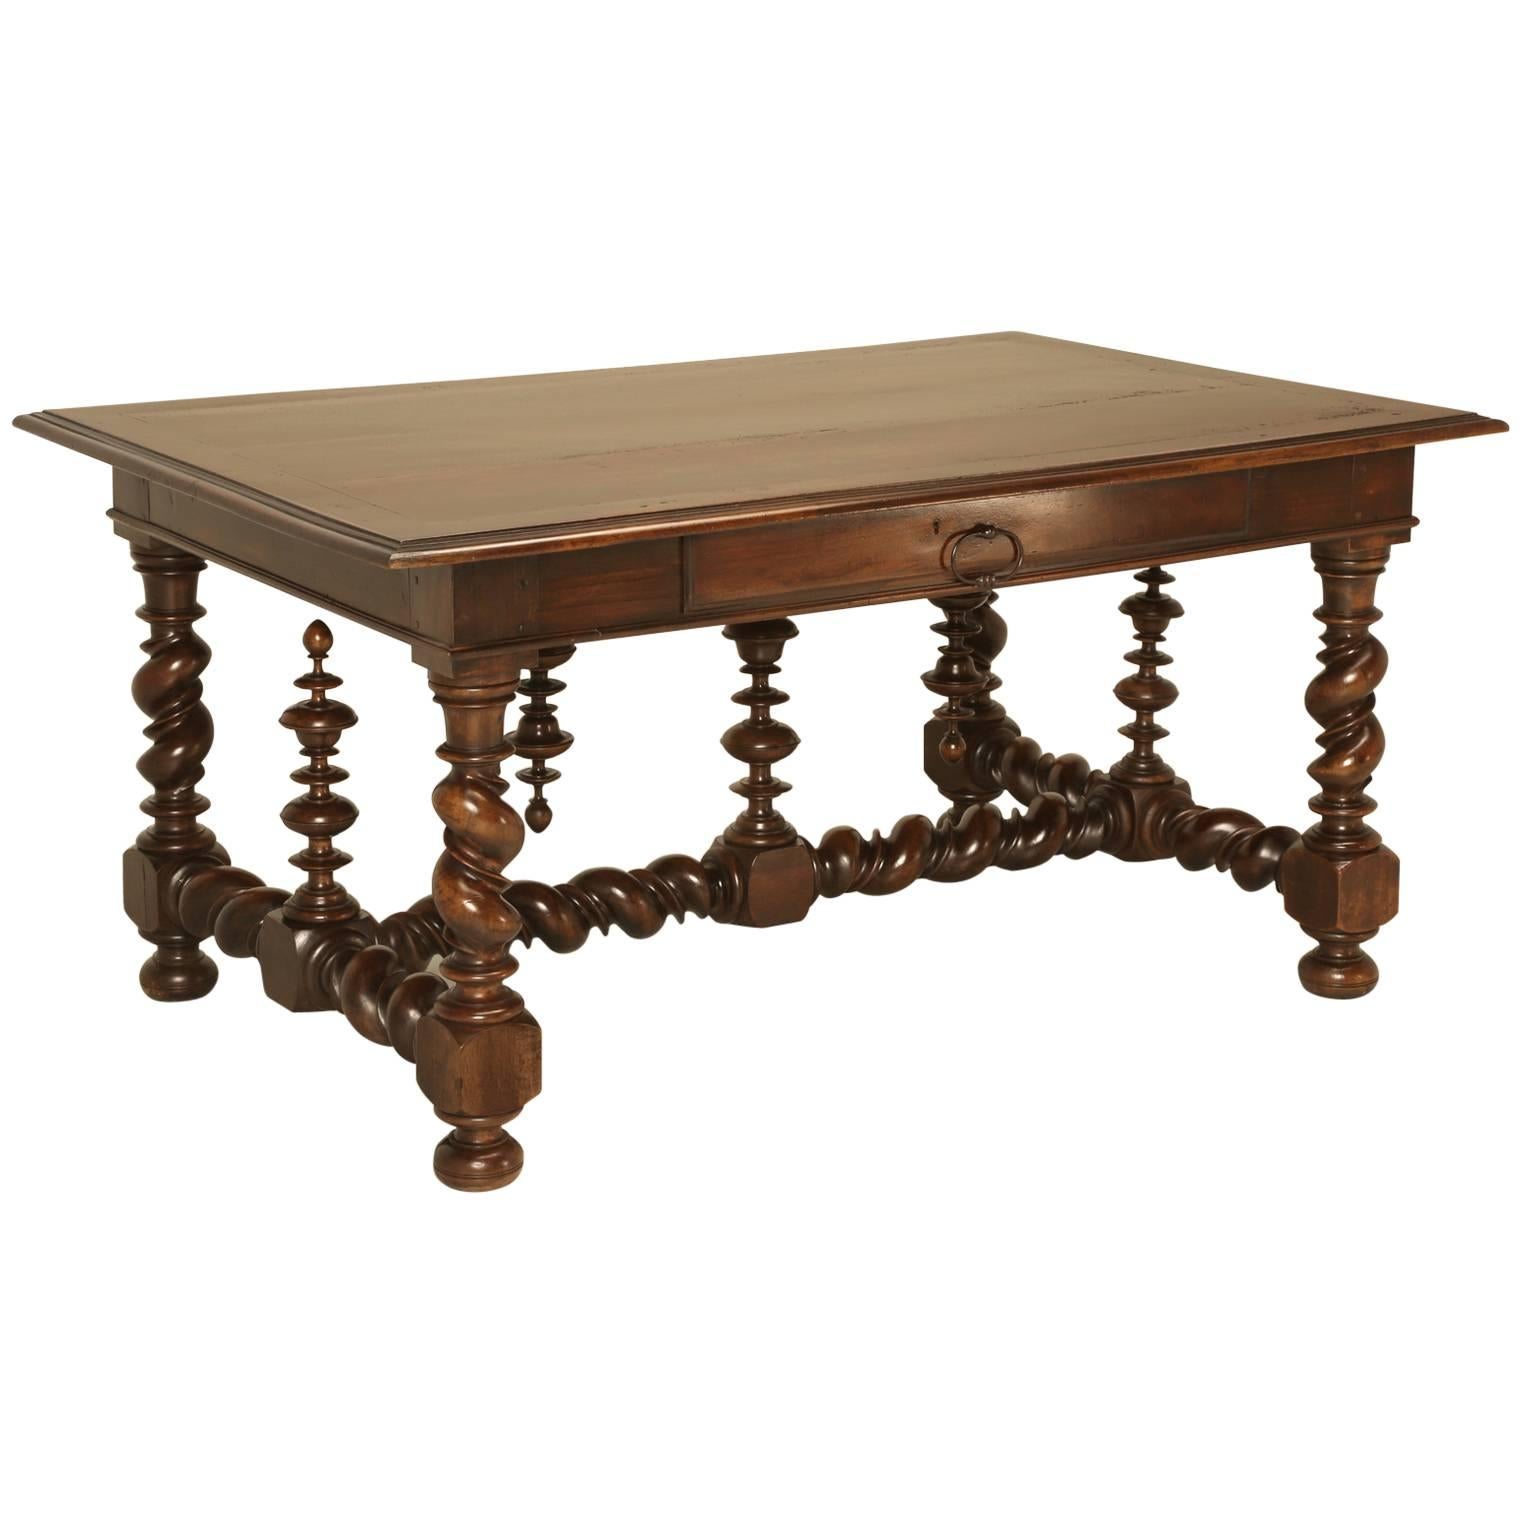 Antique French Writing Table from the 1800s